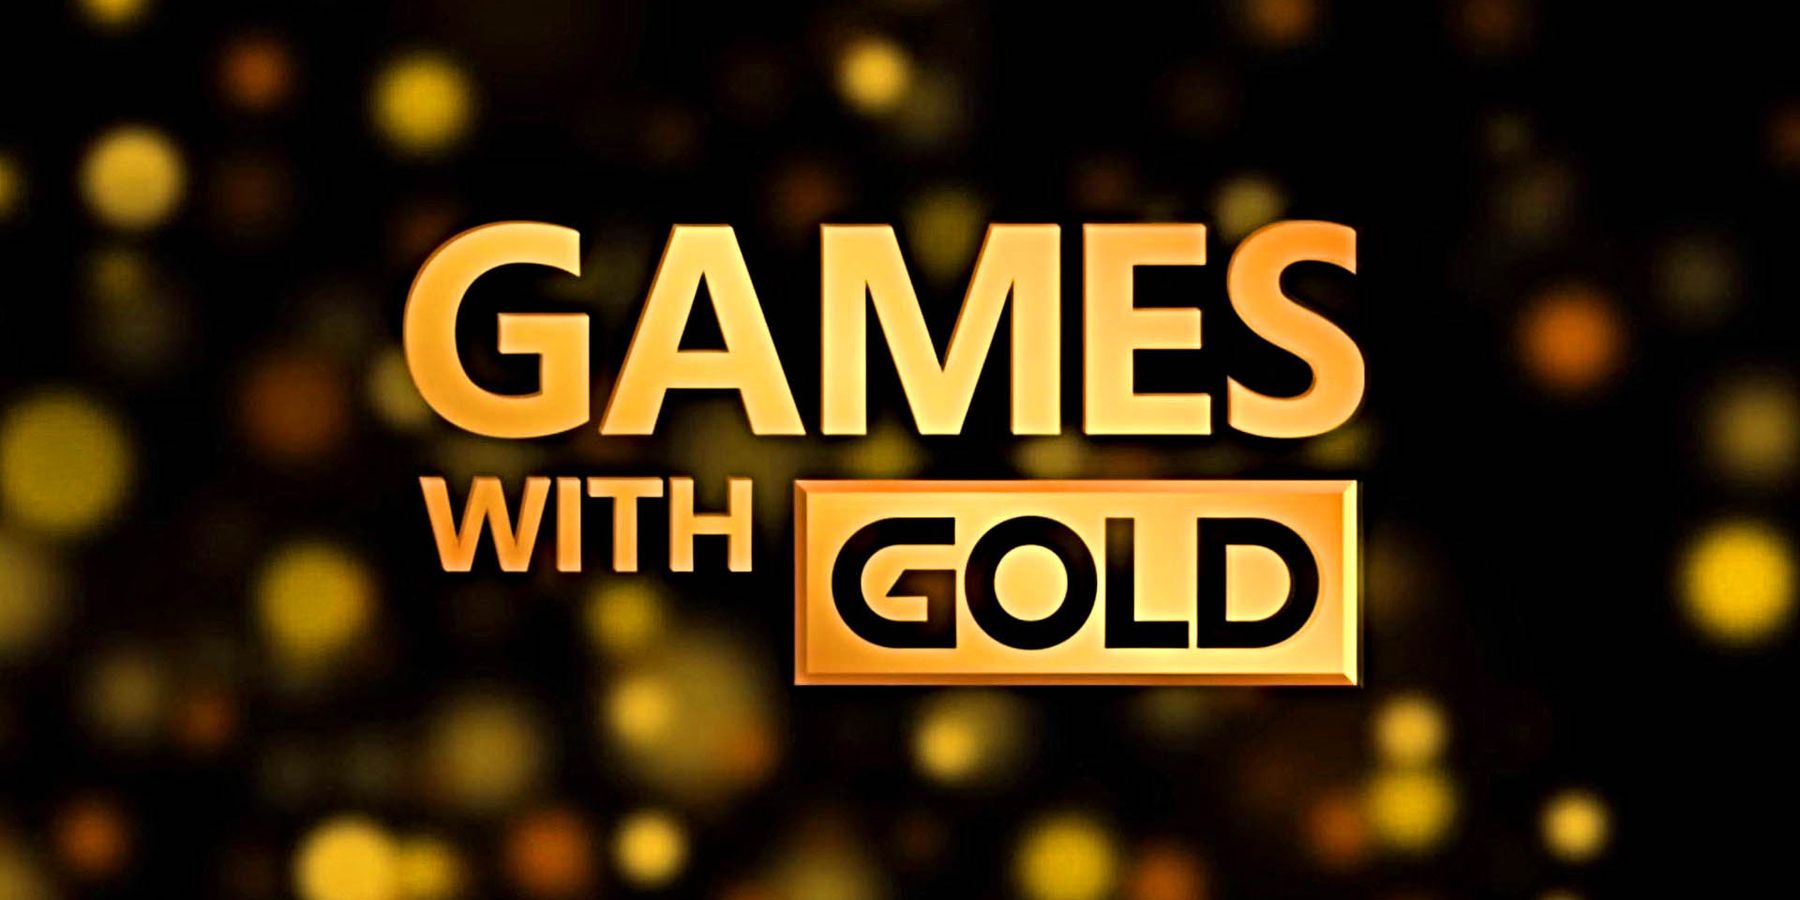 Xbox Free Games With Gold for January 2023 Revealed